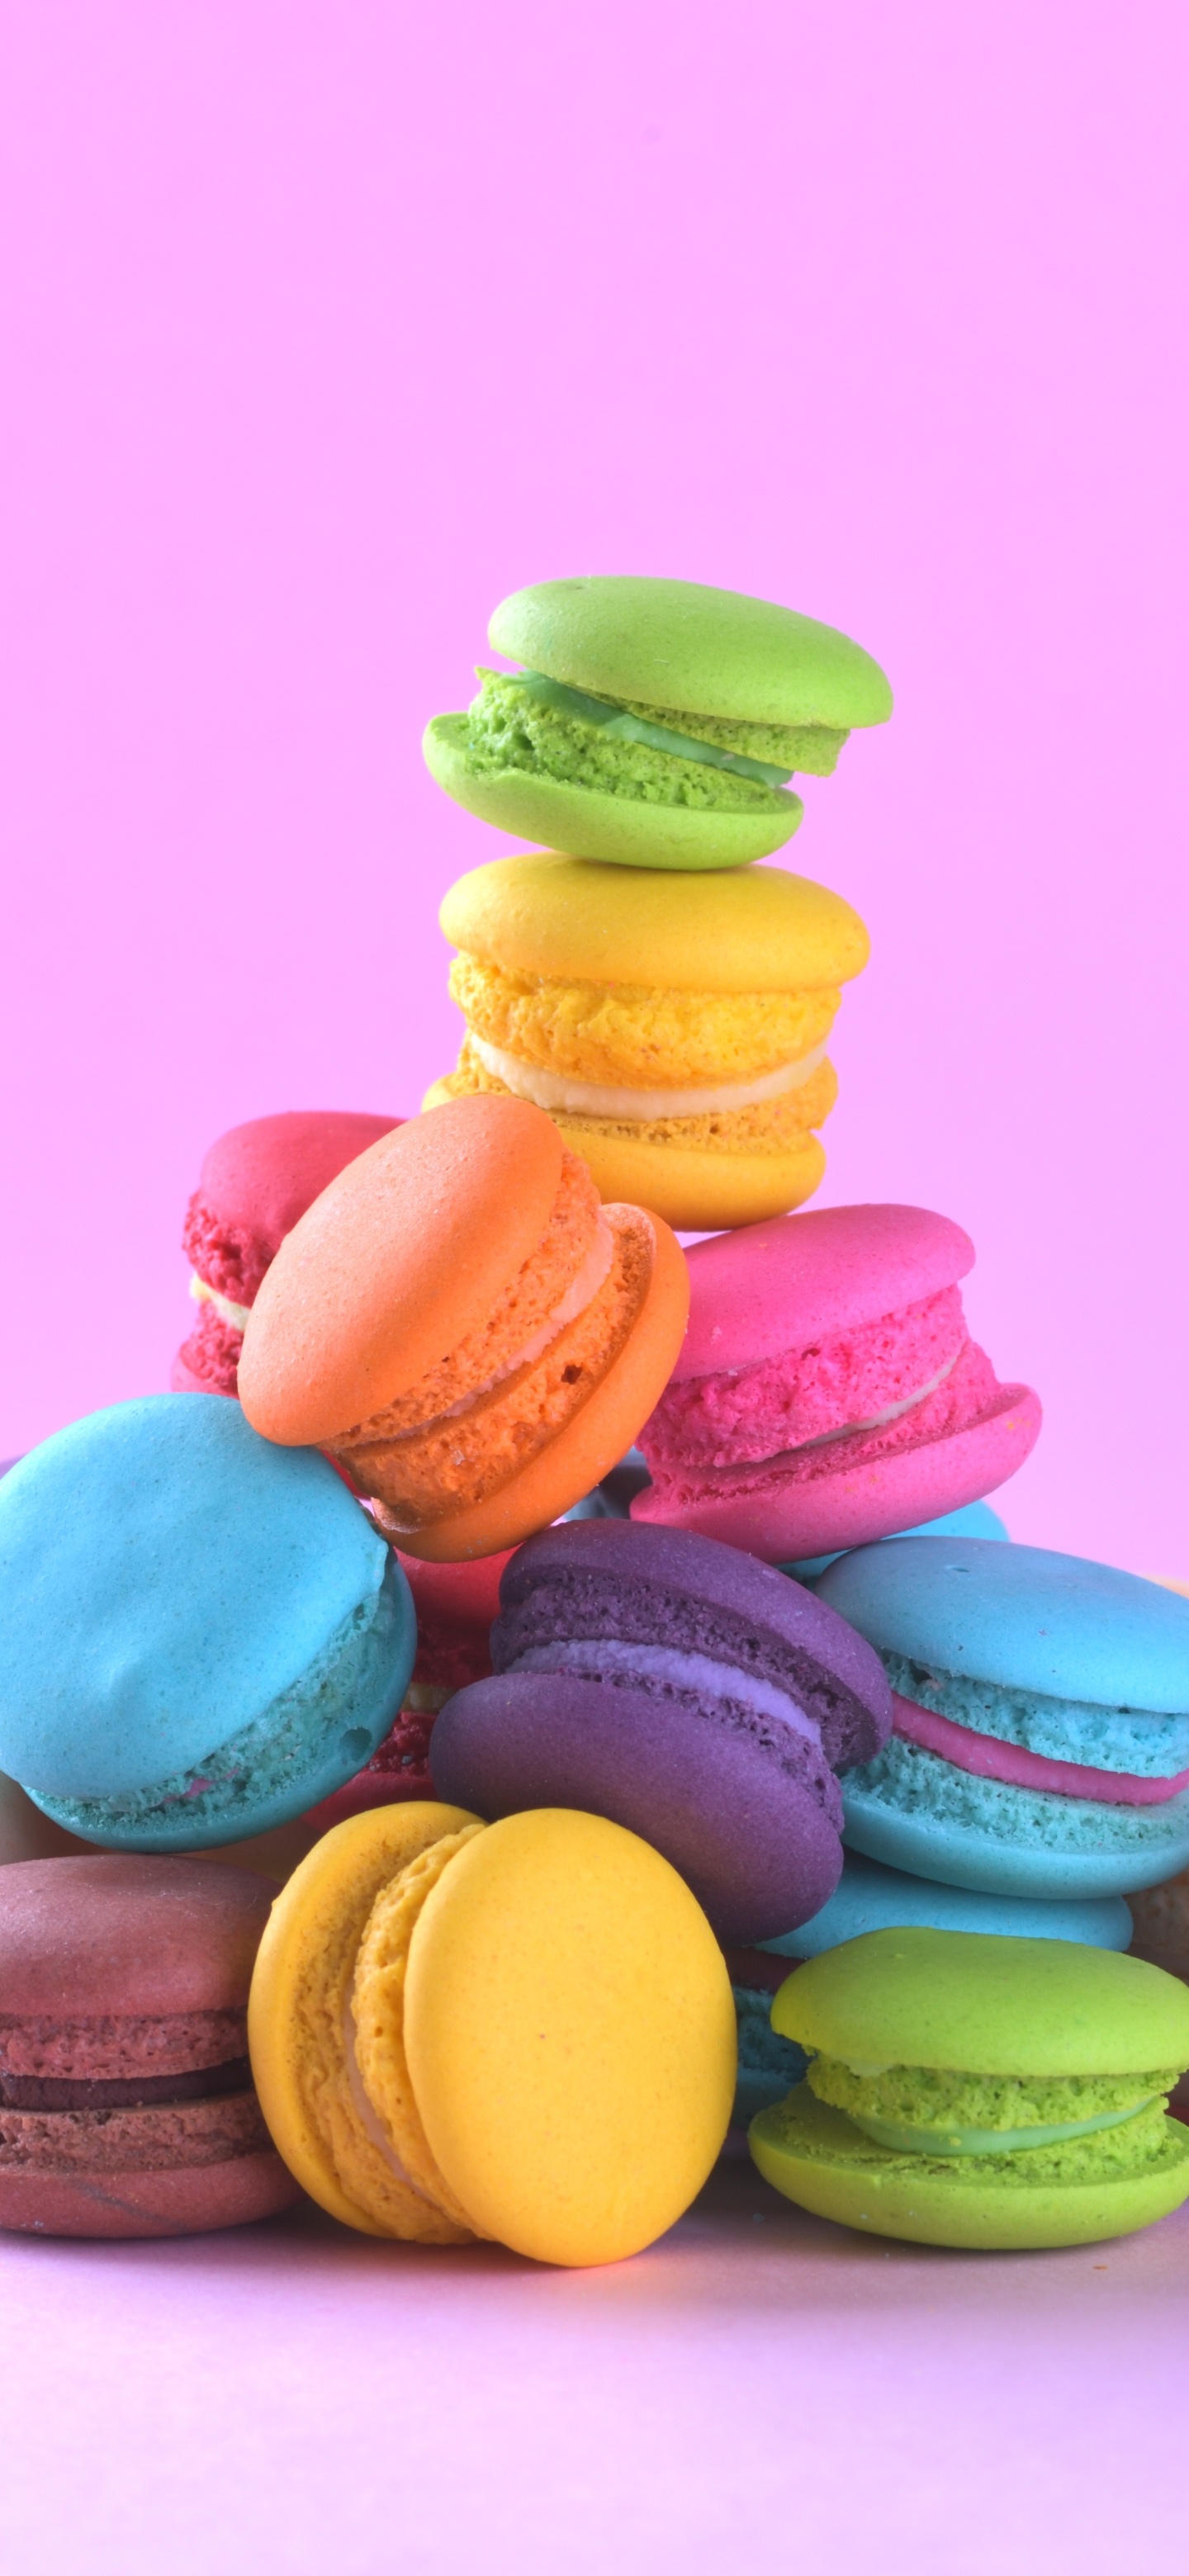 Macaron: Consists of two meringue-based cookies sandwiched together with a filling. 1440x3120 HD Wallpaper.